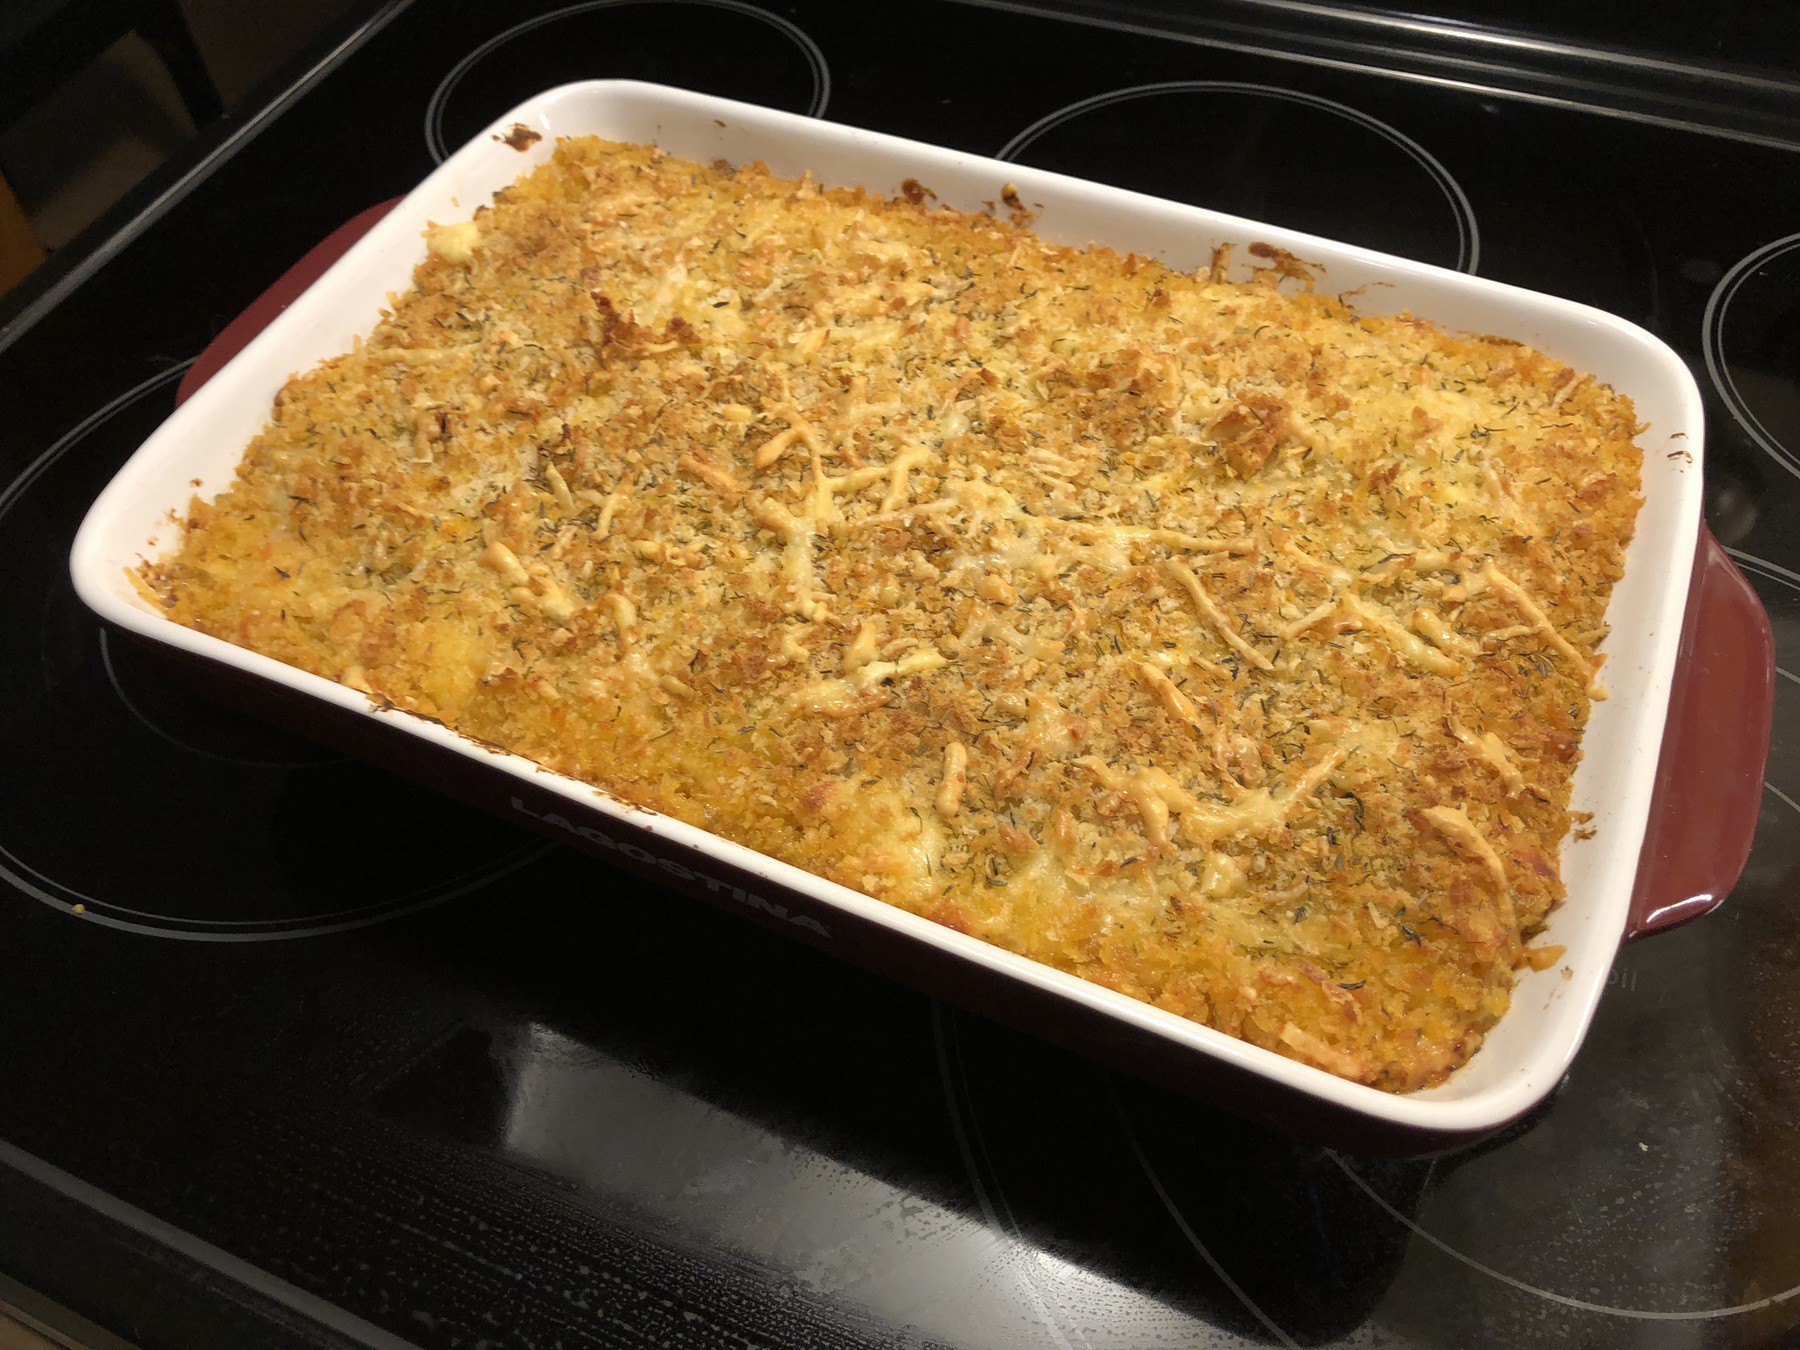 baked macaroni and cheese on stove